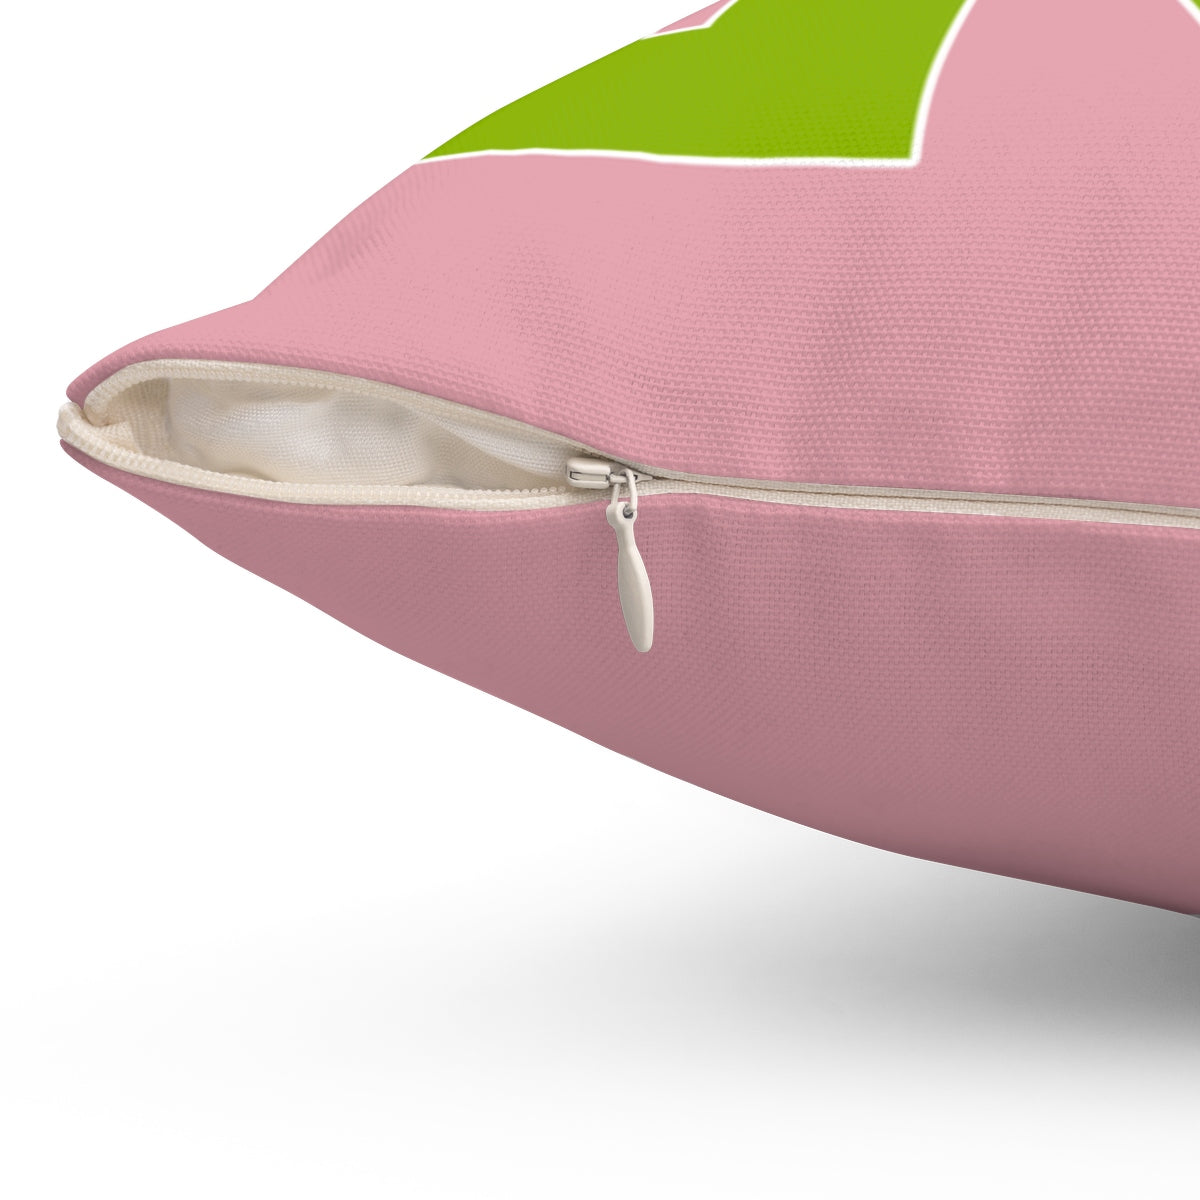 Pink and Green K Pillow